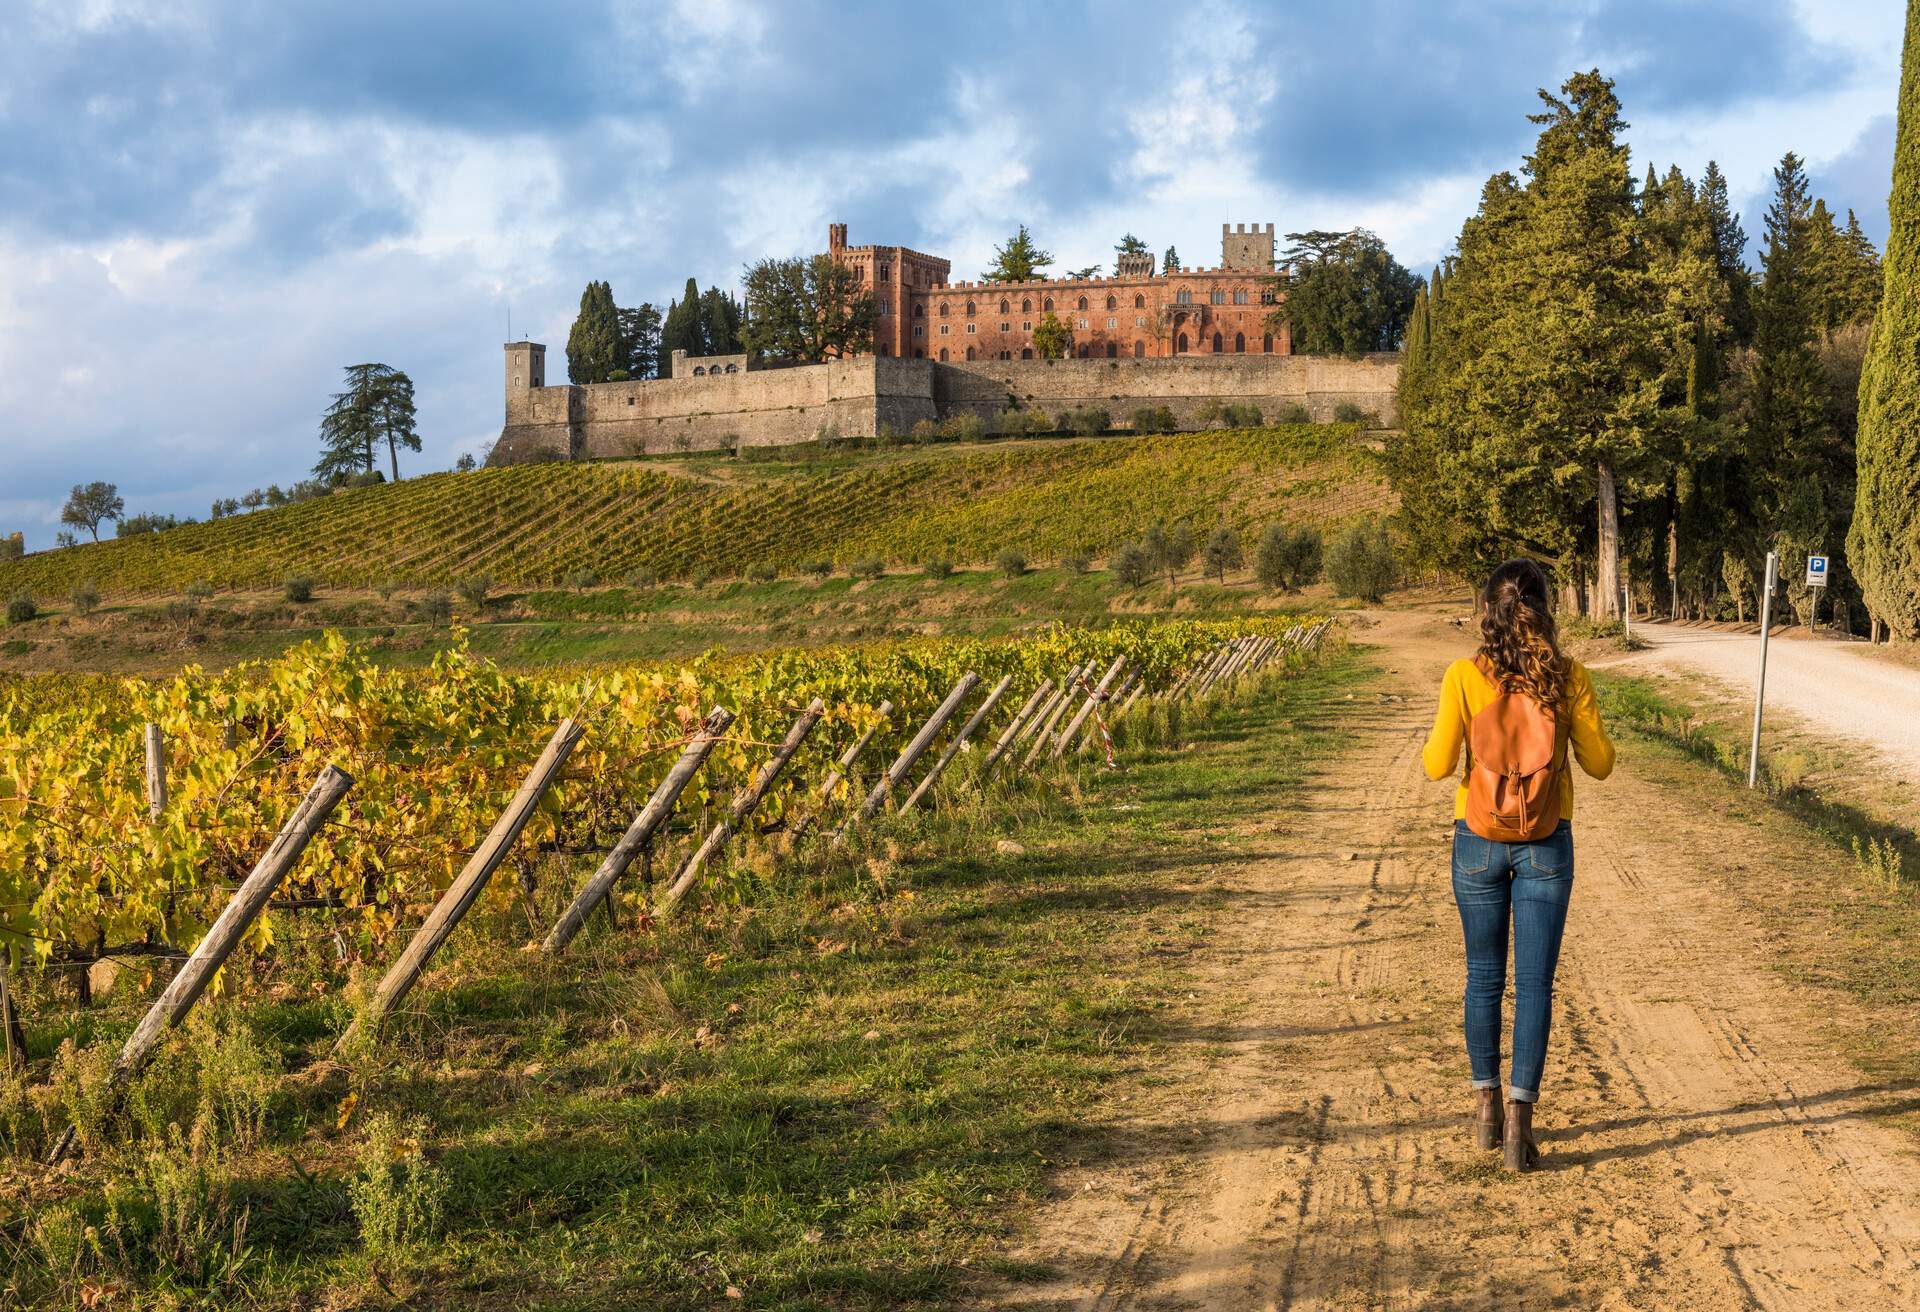 A woman walking down a dirt road along a vineyard, with a hilltop castle in the distance.